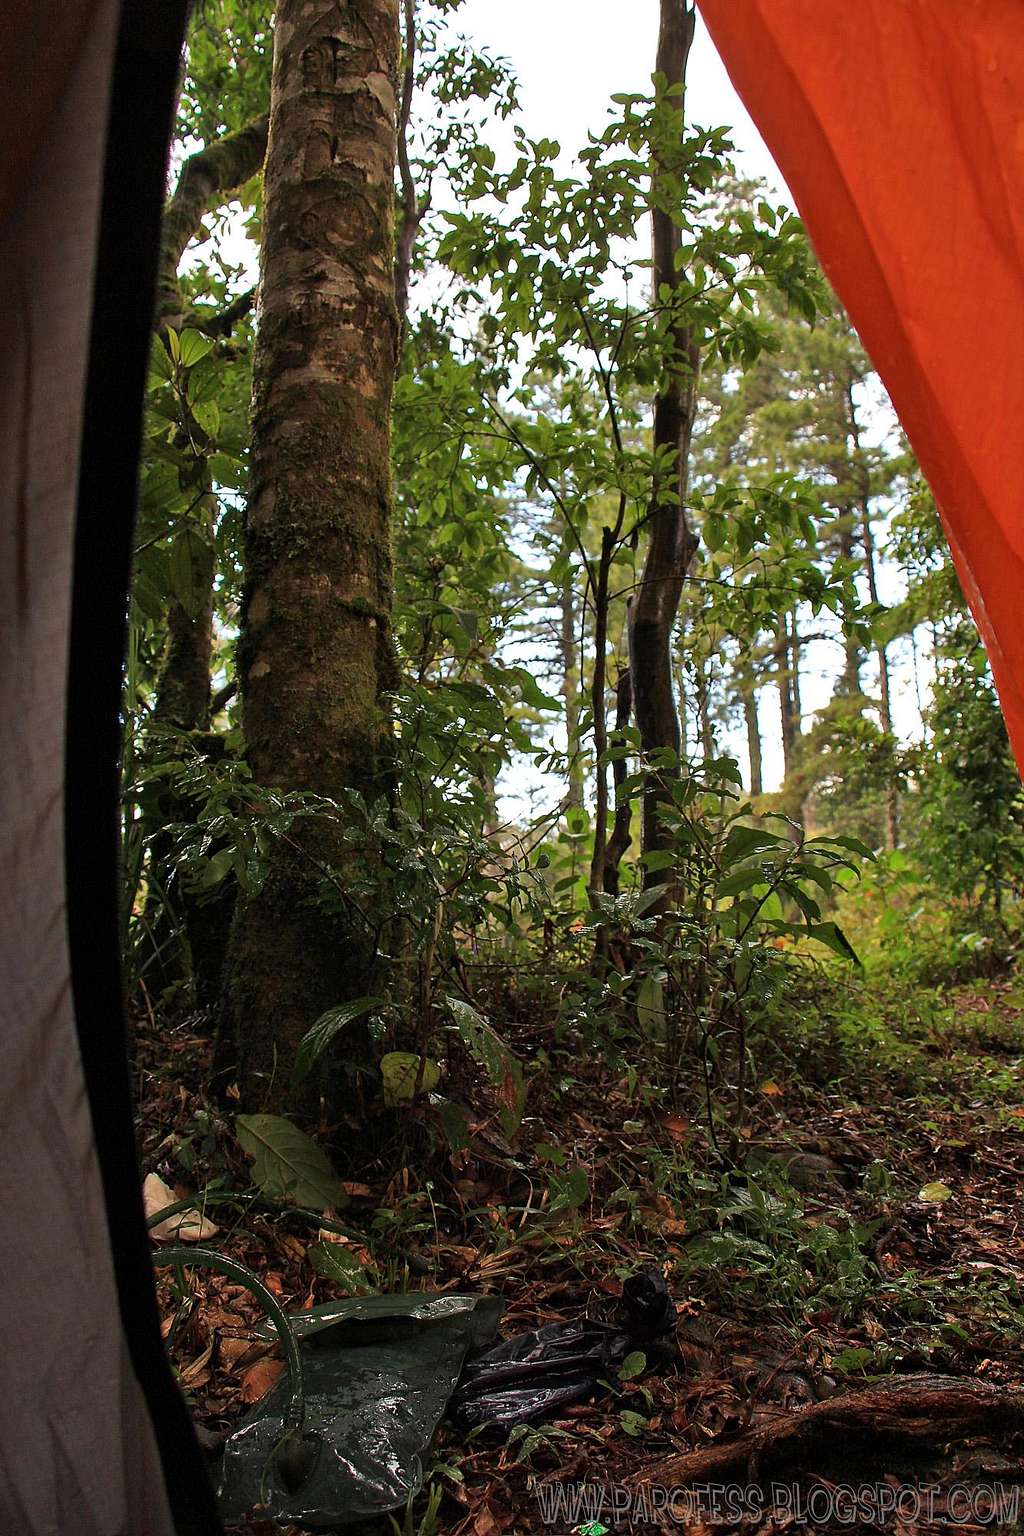 View from inside my tent